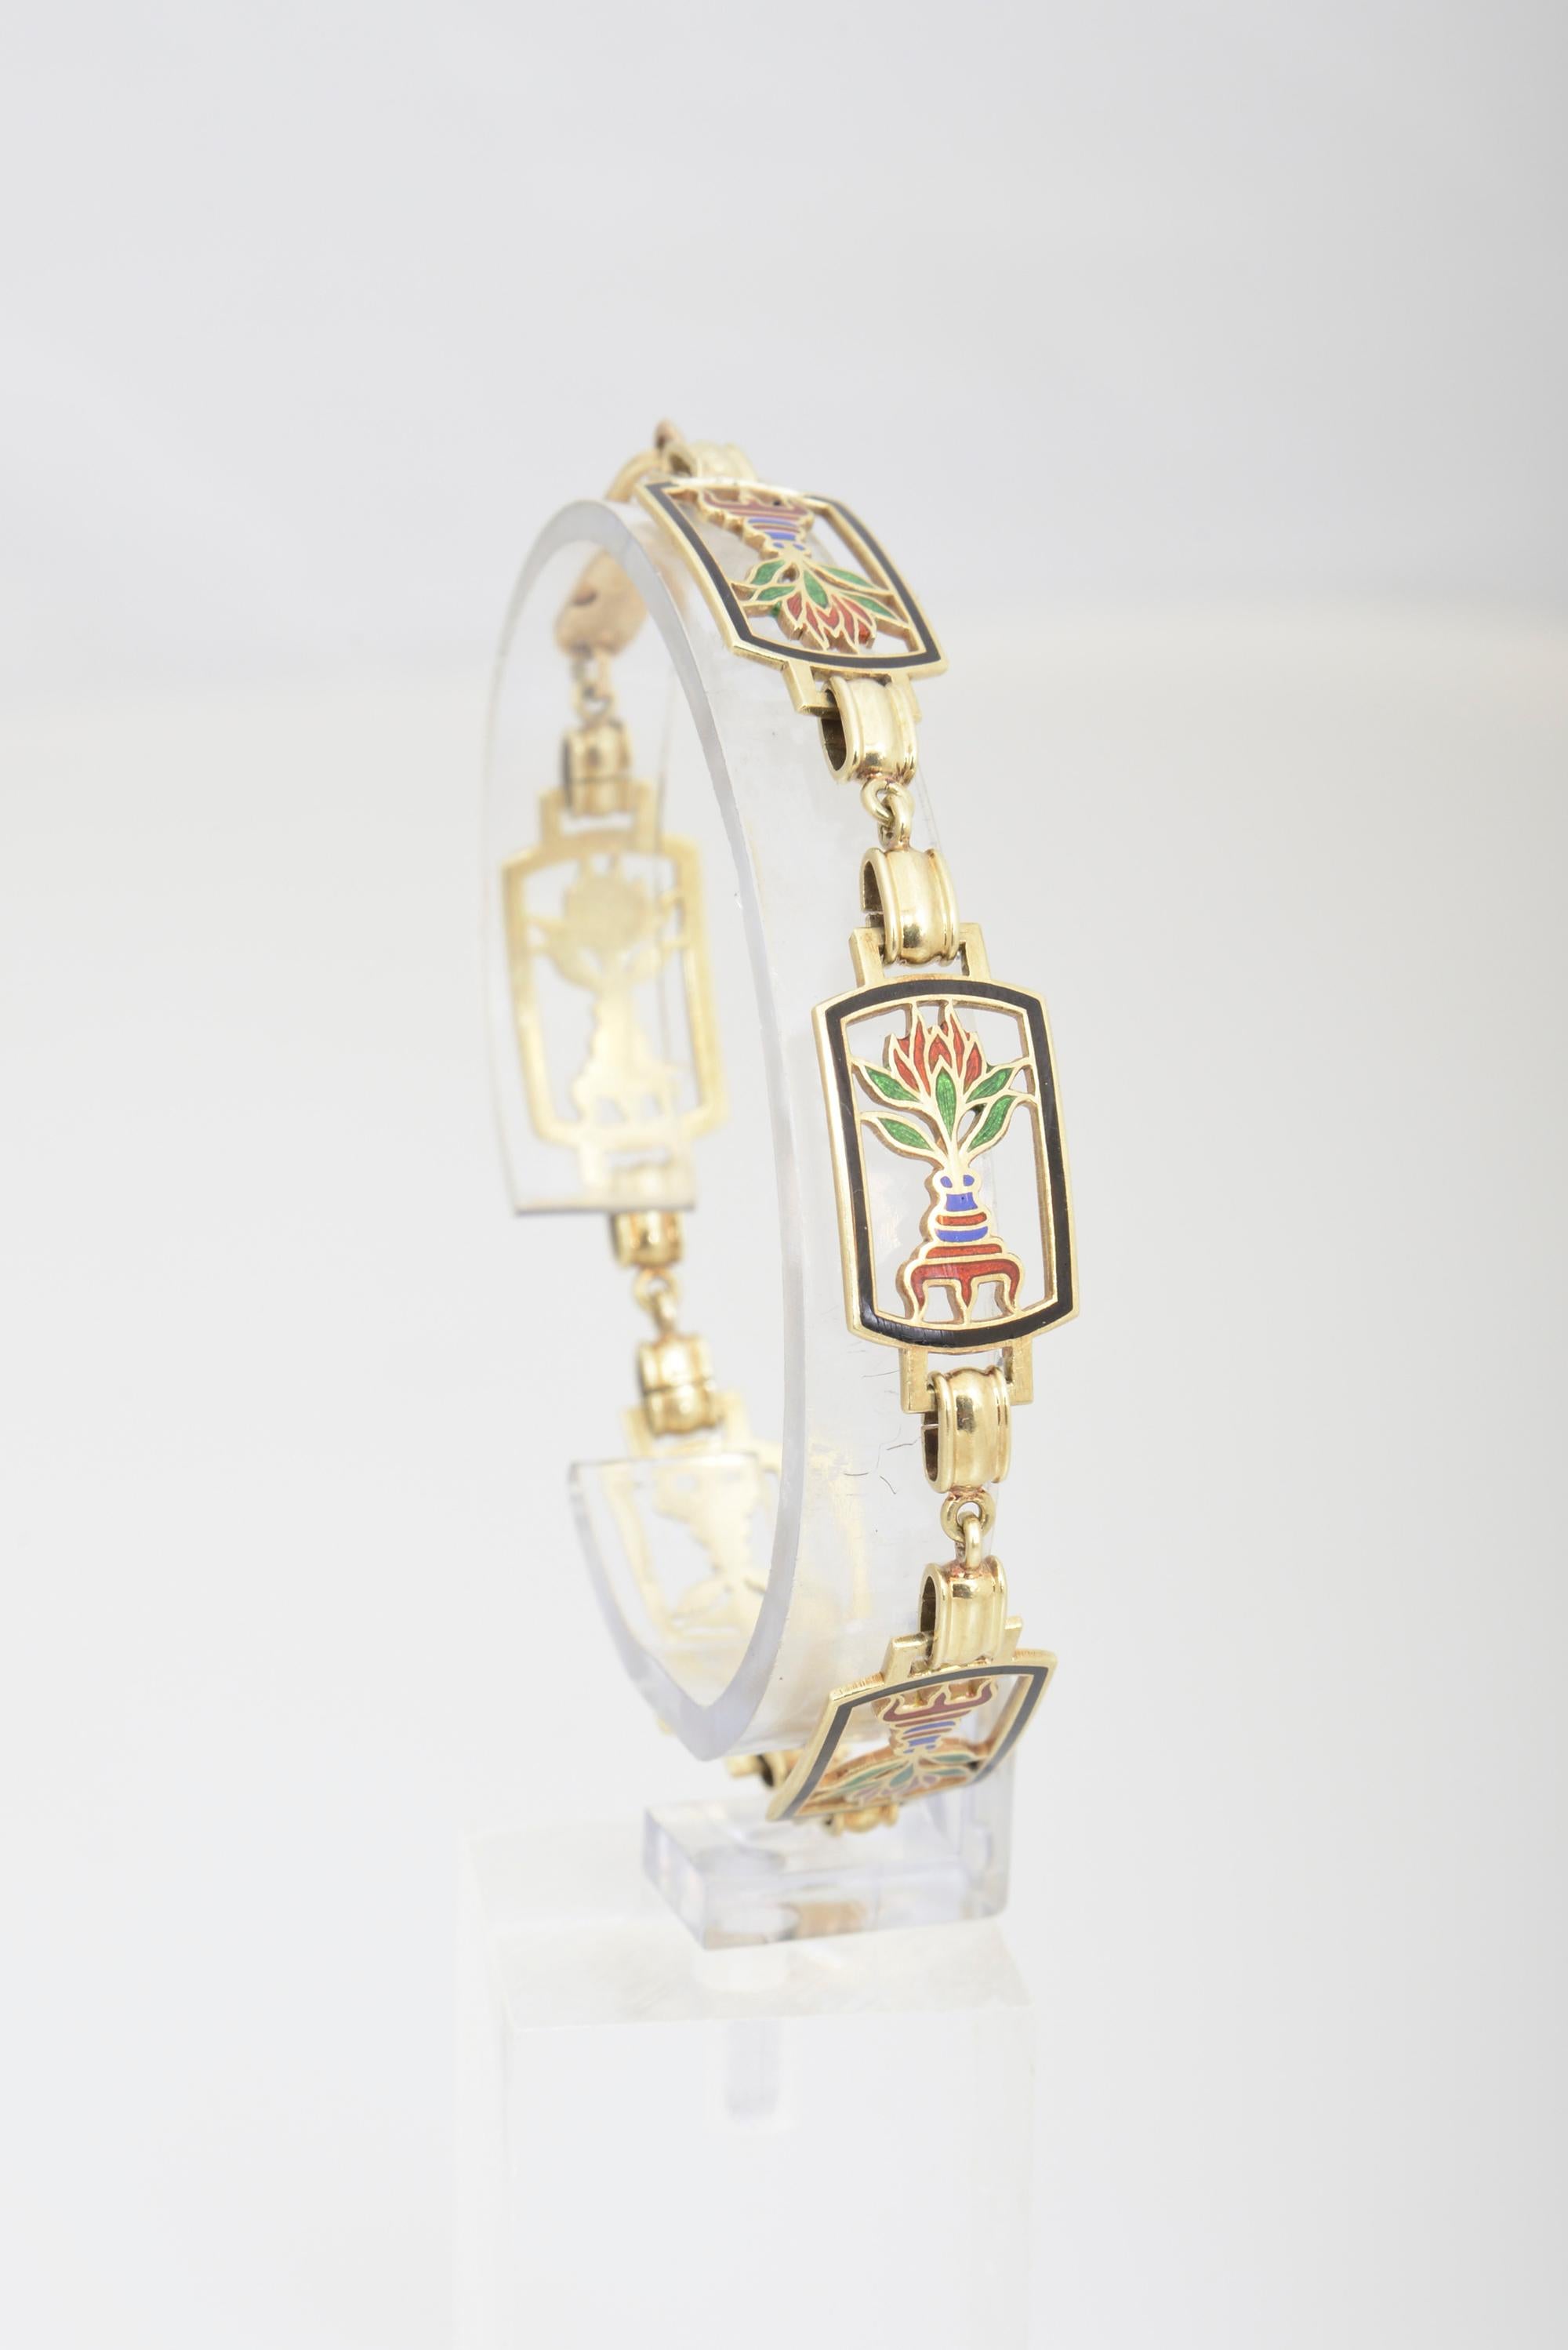 Italian 14K gold bracelet containing five cloisonné polychrome enamel plaques with lotus coming out of a vase design. Stamped 14k Faro Italy